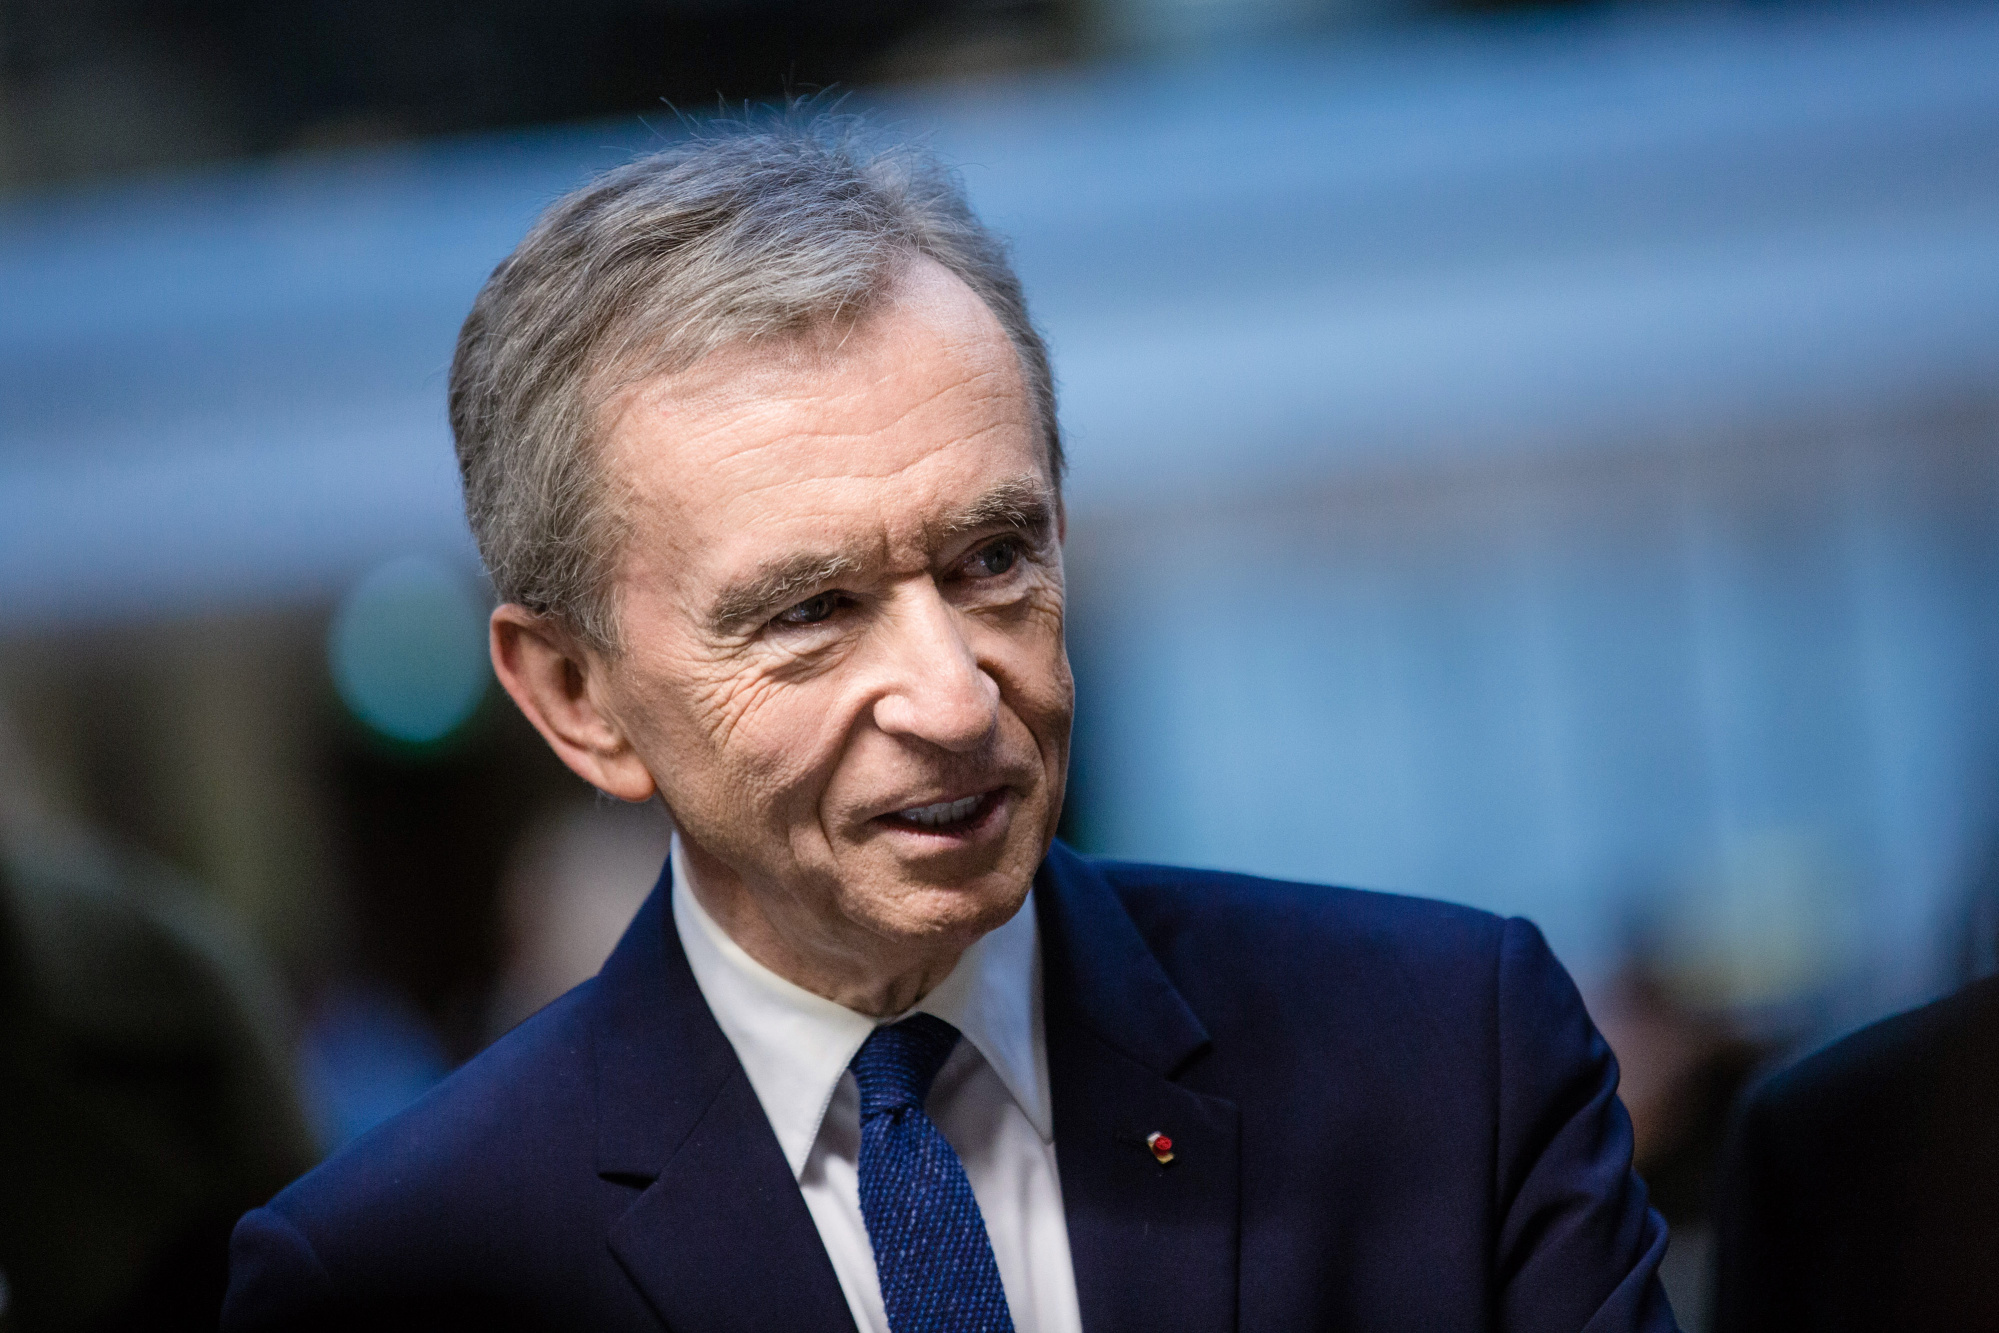 Groupe Arnault seeks foothold in French tech start-ups